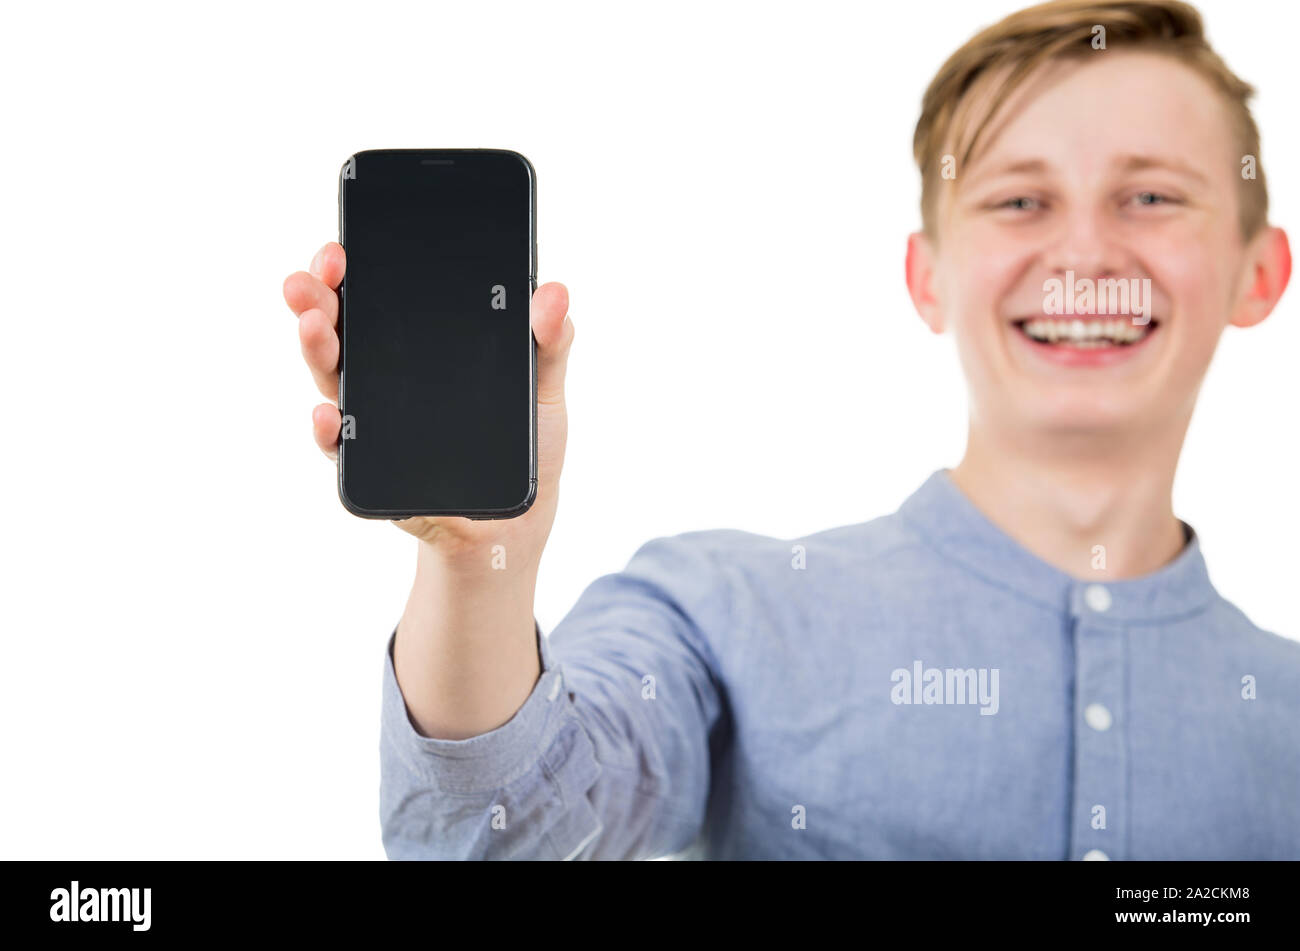 Happy teenager boy showing his smartphone blank screen isolated over white background. Joyful adolescent guy presenting a new device. Stock Photo